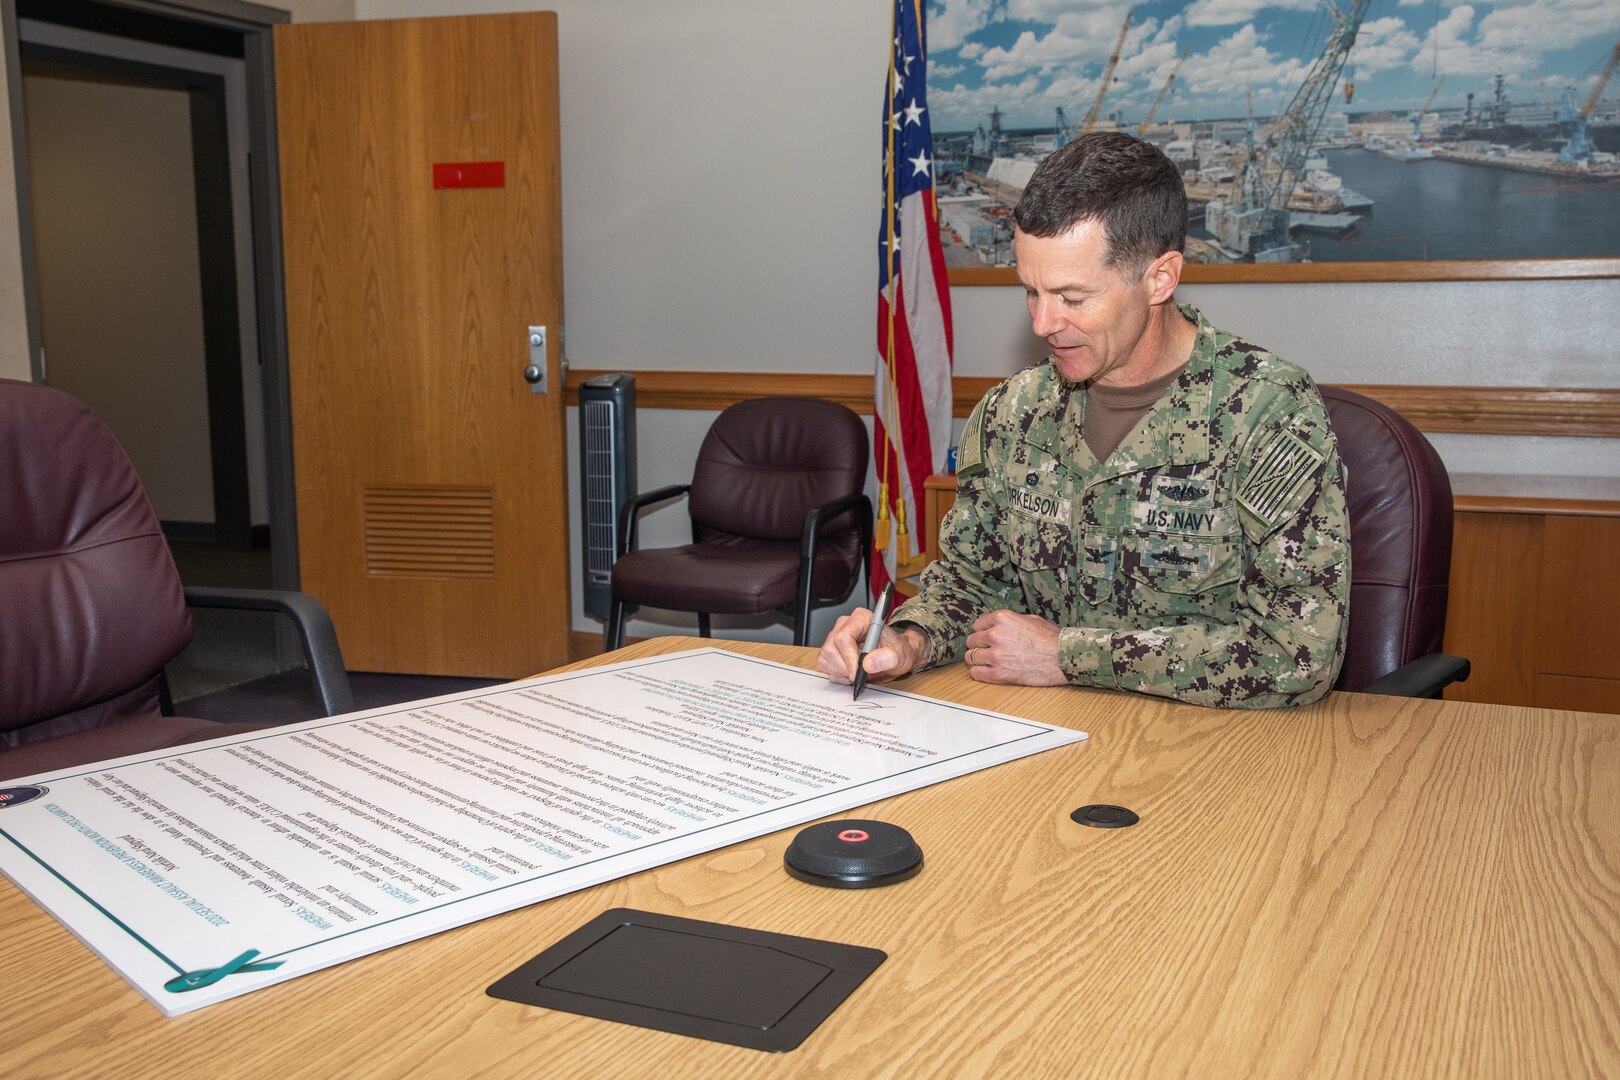 NNSY Commander, Capt. Kai Torkelson, read and signed a proclamation for SAAPM, calling upon America’s Shipyard, Sailors, and family members to increase their participation in efforts to prevent sexual assault and strengthen the Navy community.